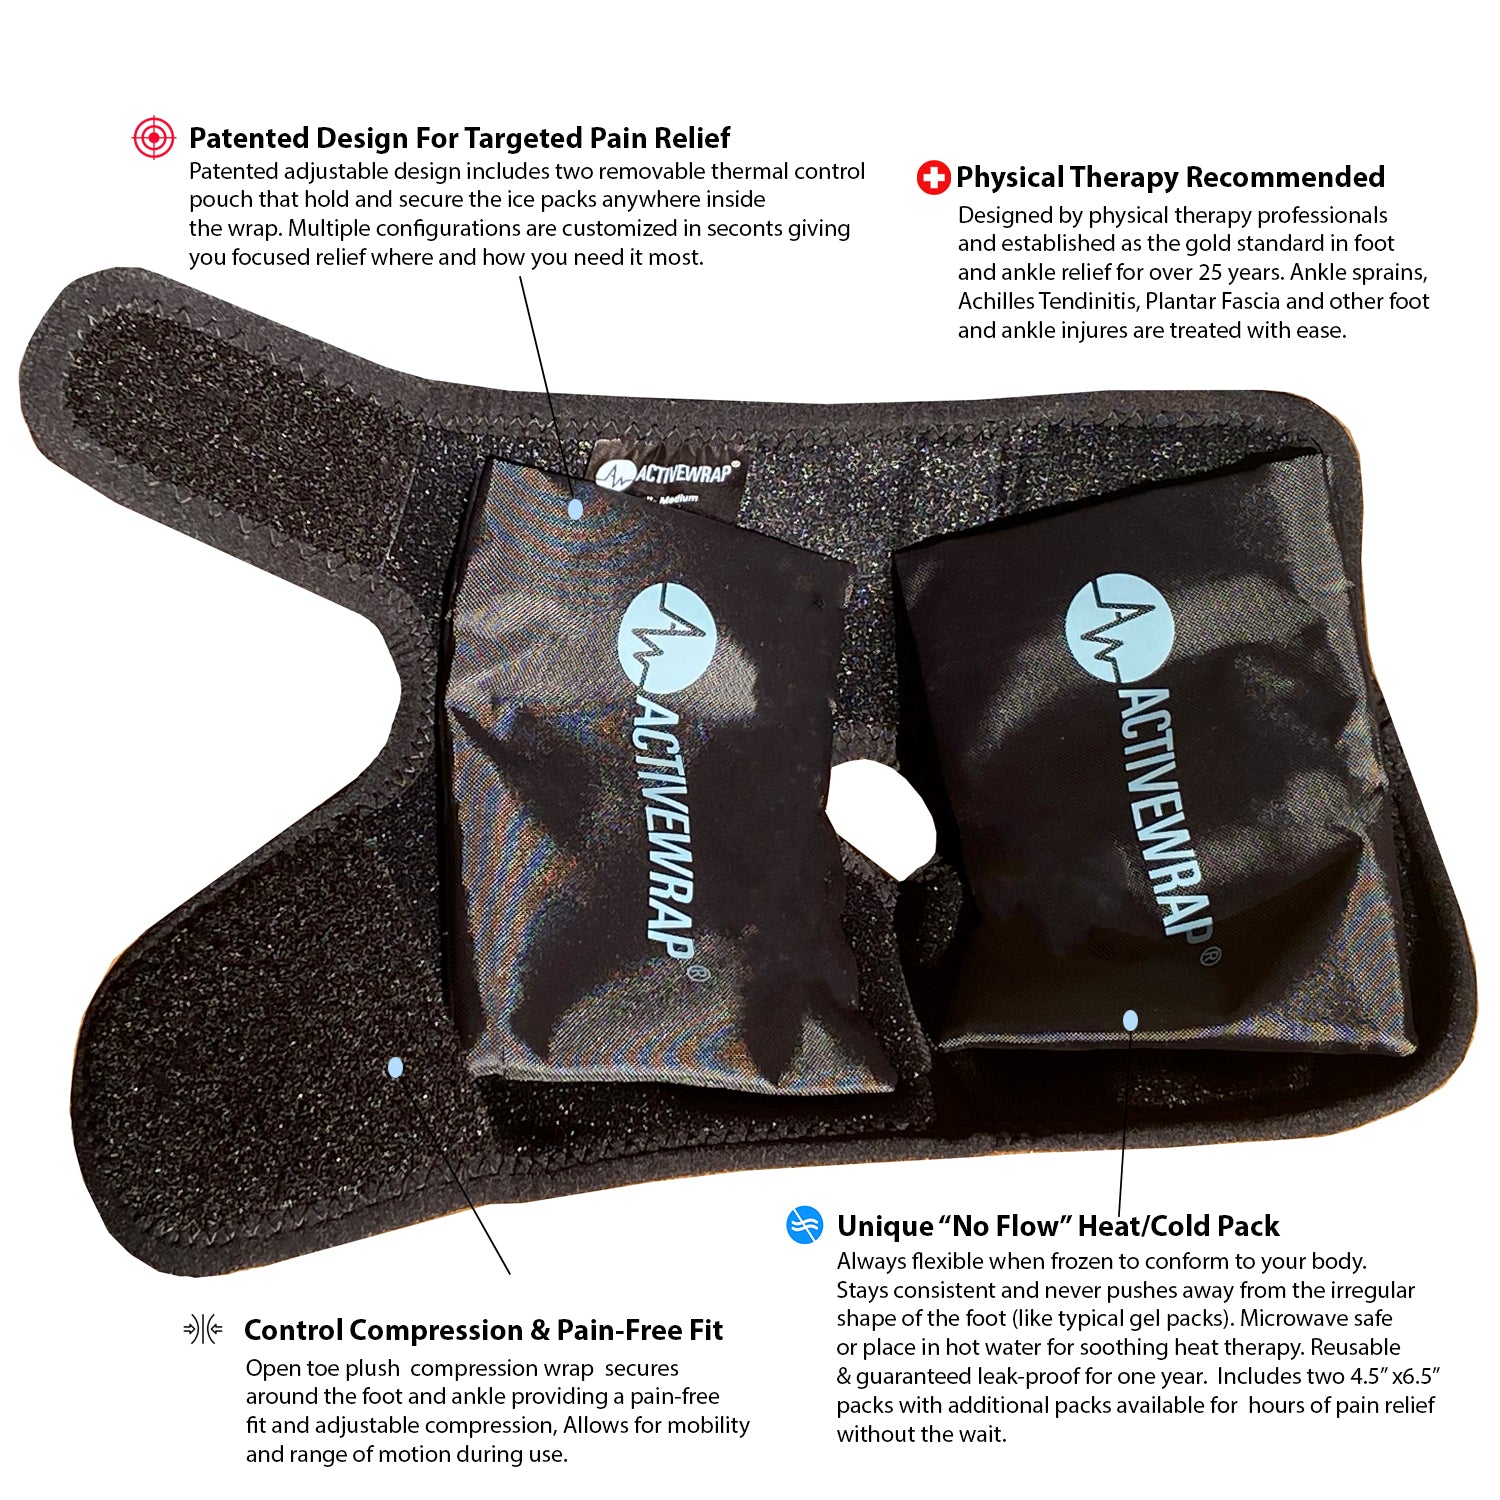 COLD/HOT PACK REUSABLE,SMALL (12/CS), Cold & Hot Therapy